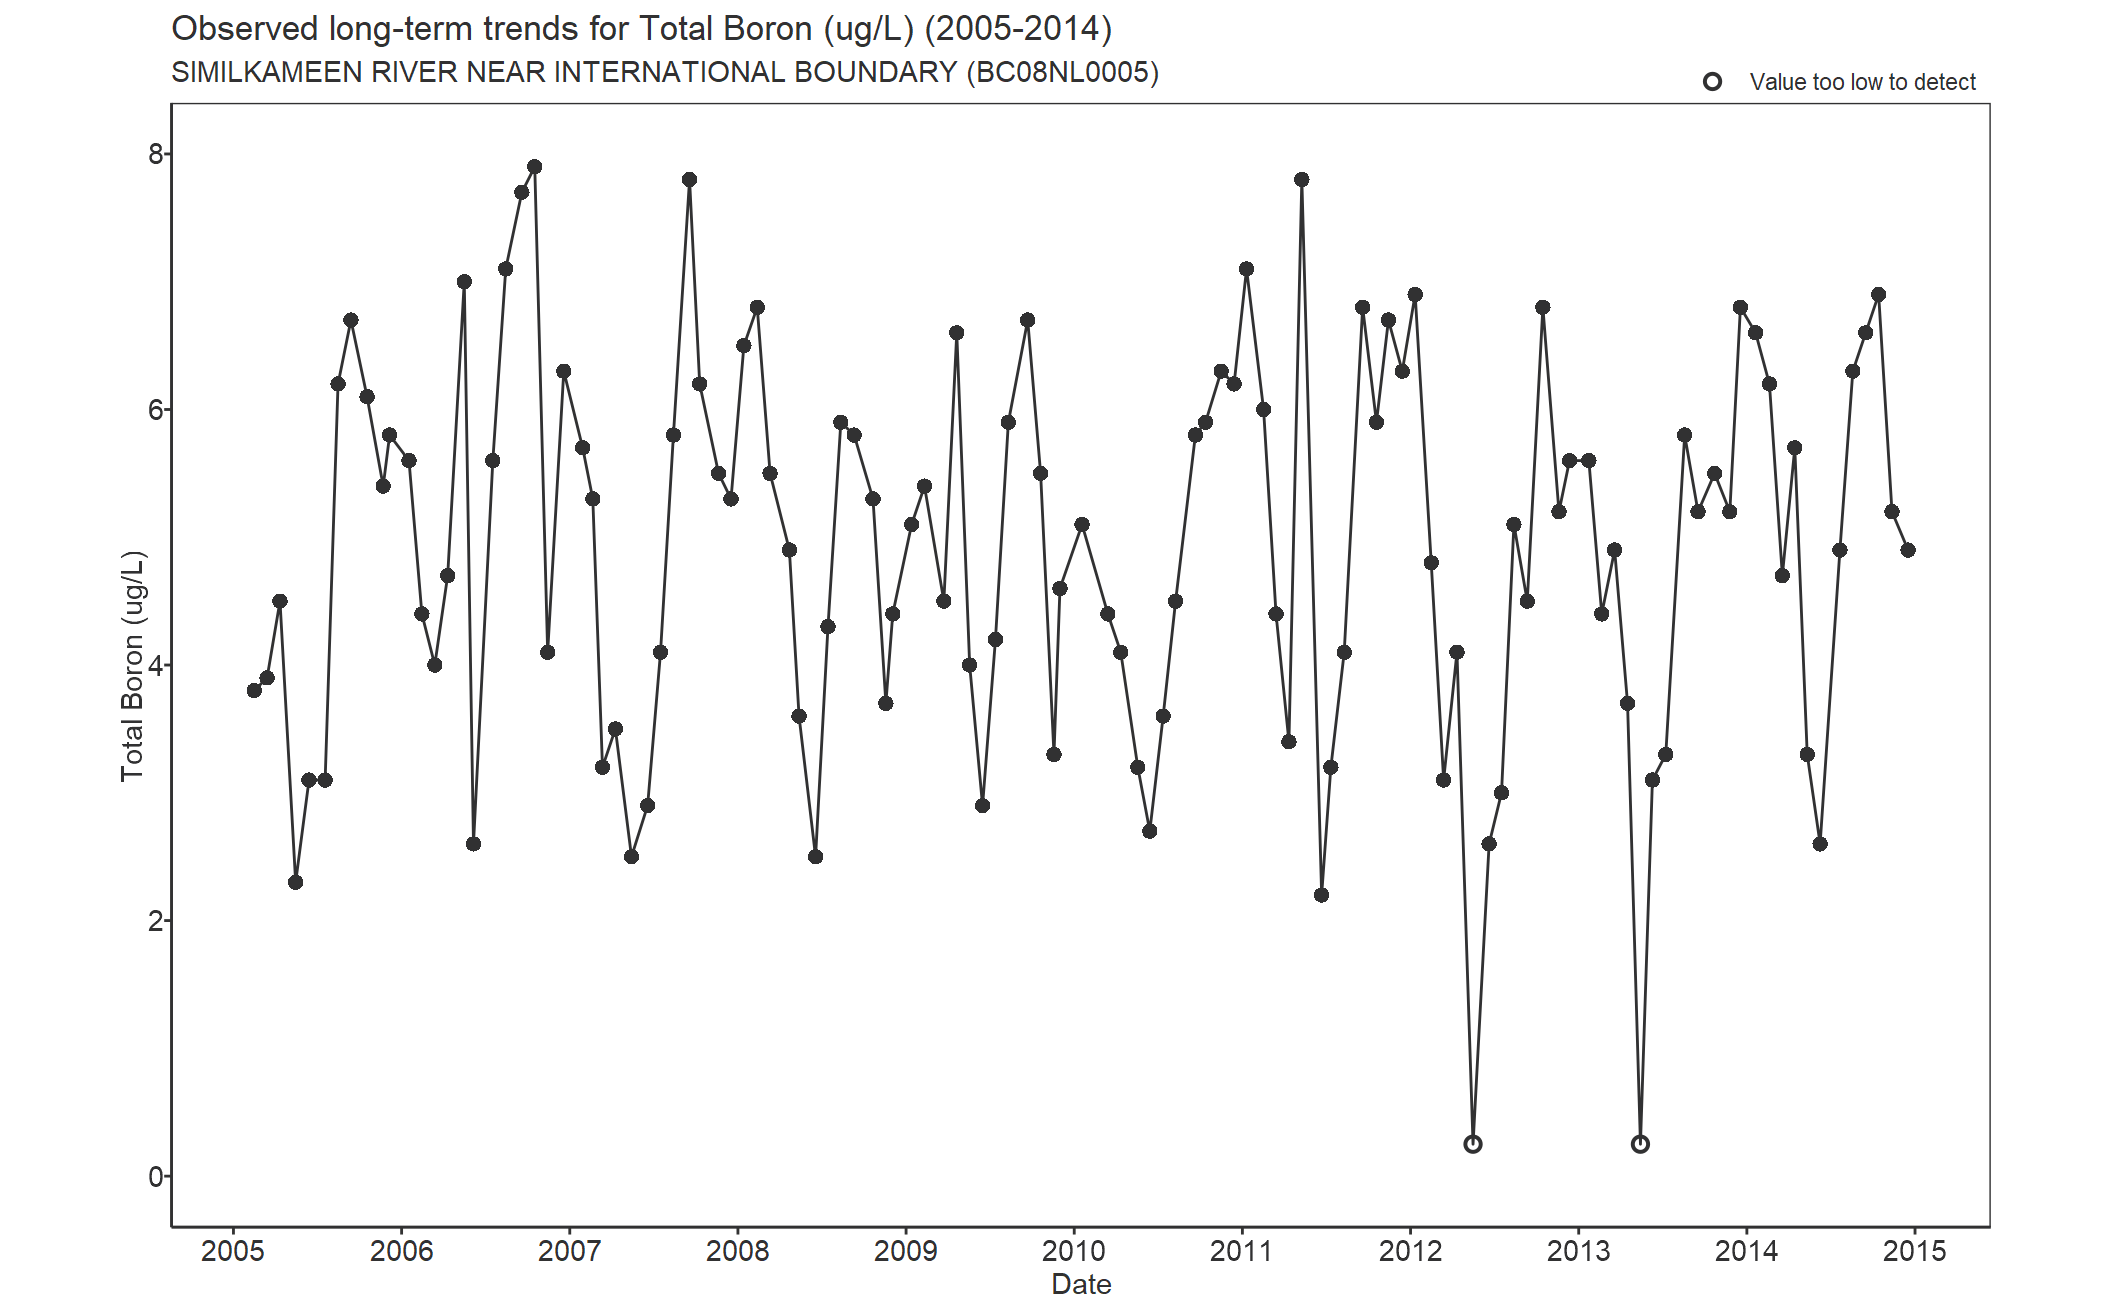 Observed long-term trends for Total Boron (2005-2014)